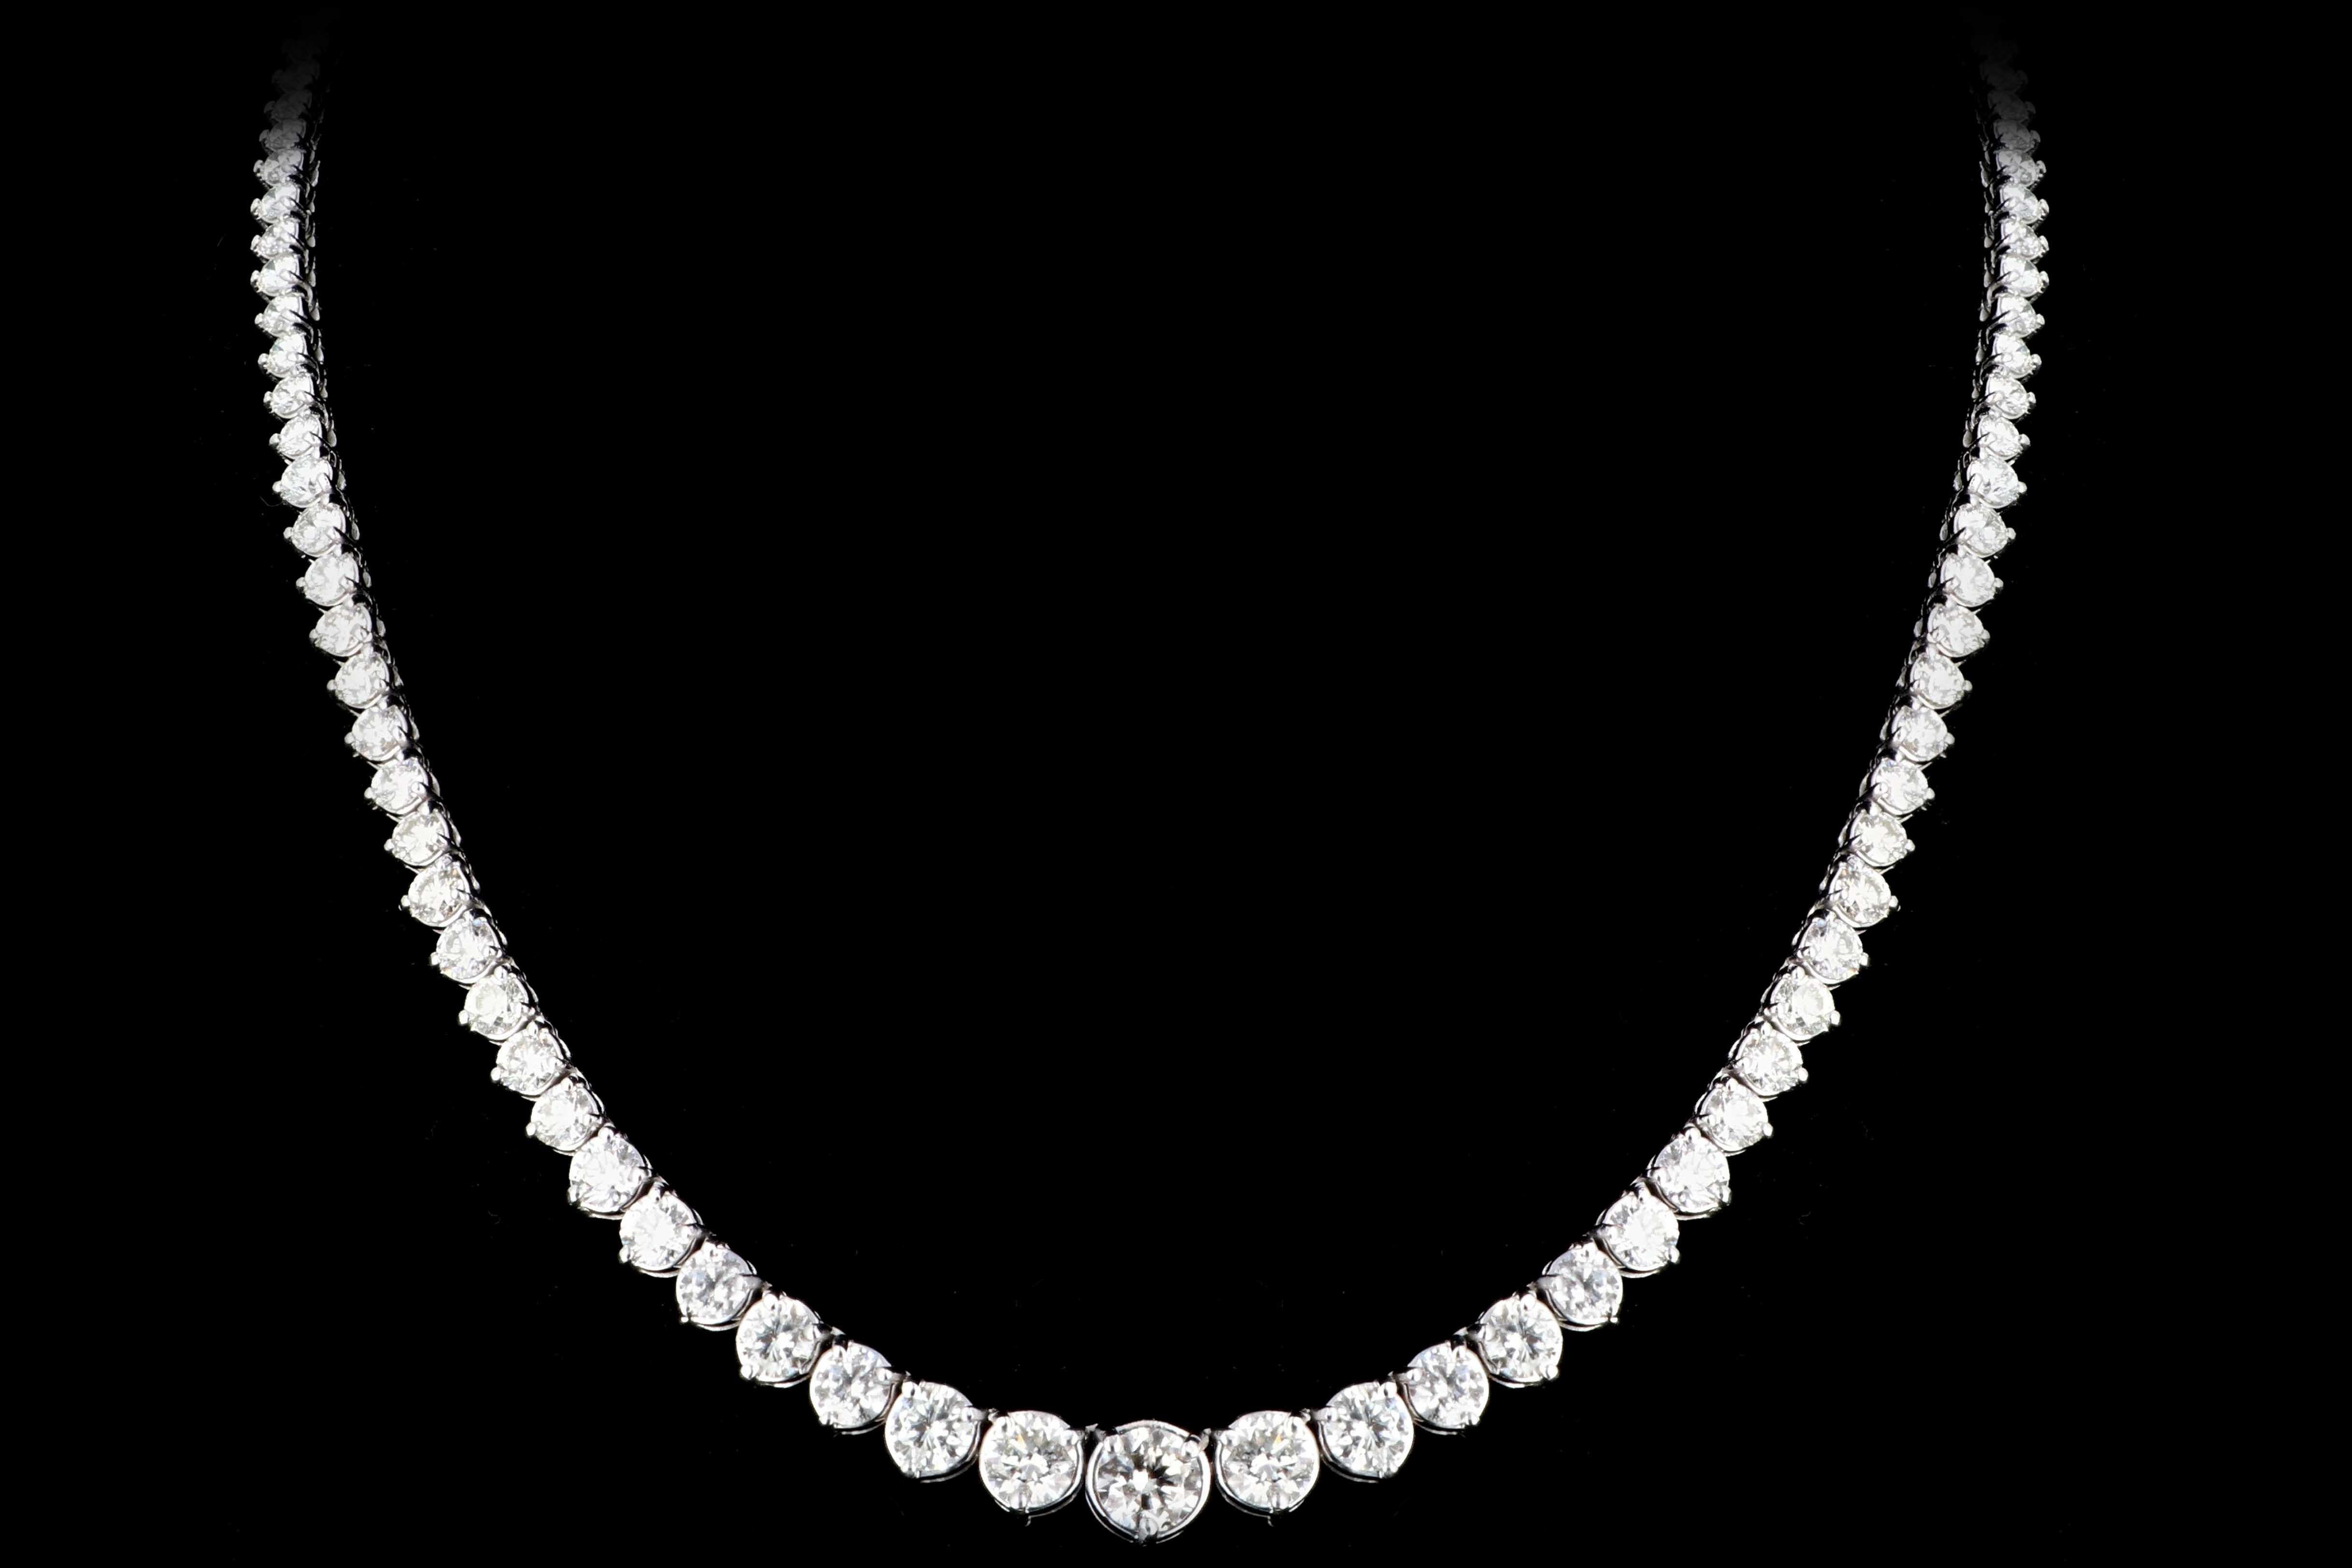 Era: New

Hallmarks: 14K

Composition: 14K White Gold

Primary Stone: Round Brilliant Diamonds

Total Carat Weight: 17.39 Carats

Color: H/I

Clarity: SI2

Necklace Weight: 32.6 Grams